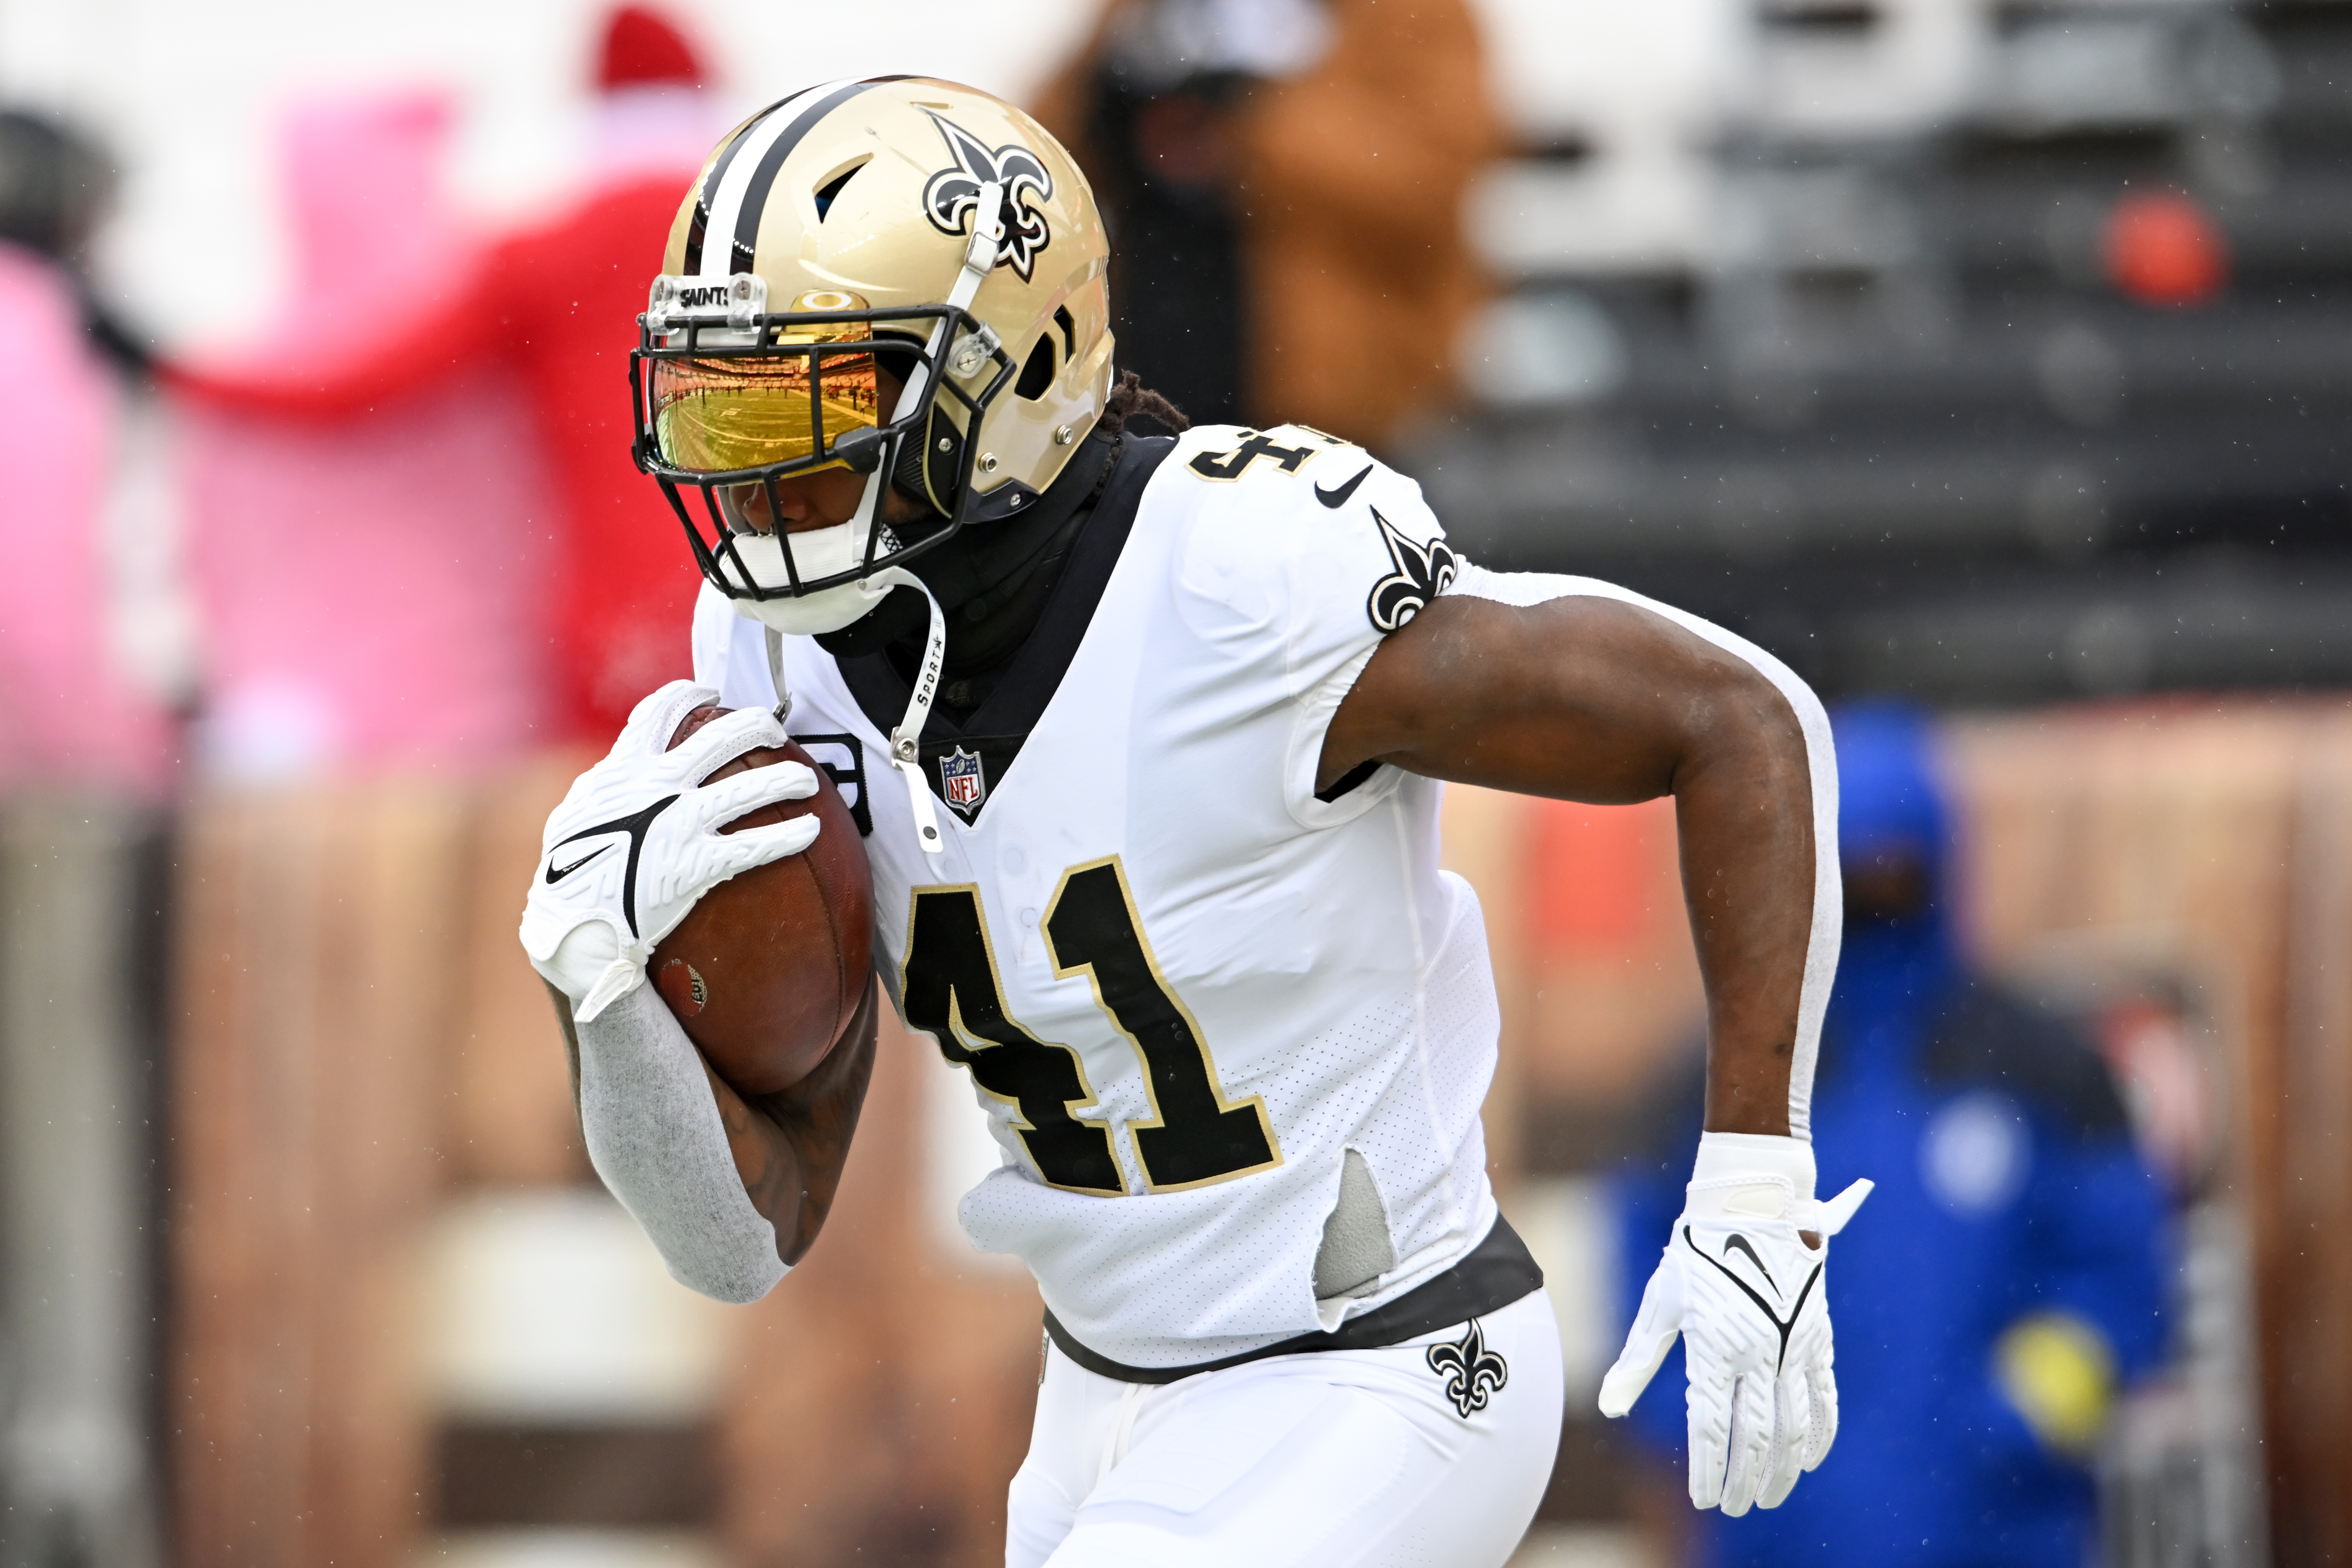 Alvin Kamara #41 of the New Orleans Saints warms up prior to a game against the Cleveland Browns at FirstEnergy Stadium on December 24, 2022 in Cleveland, Ohio.